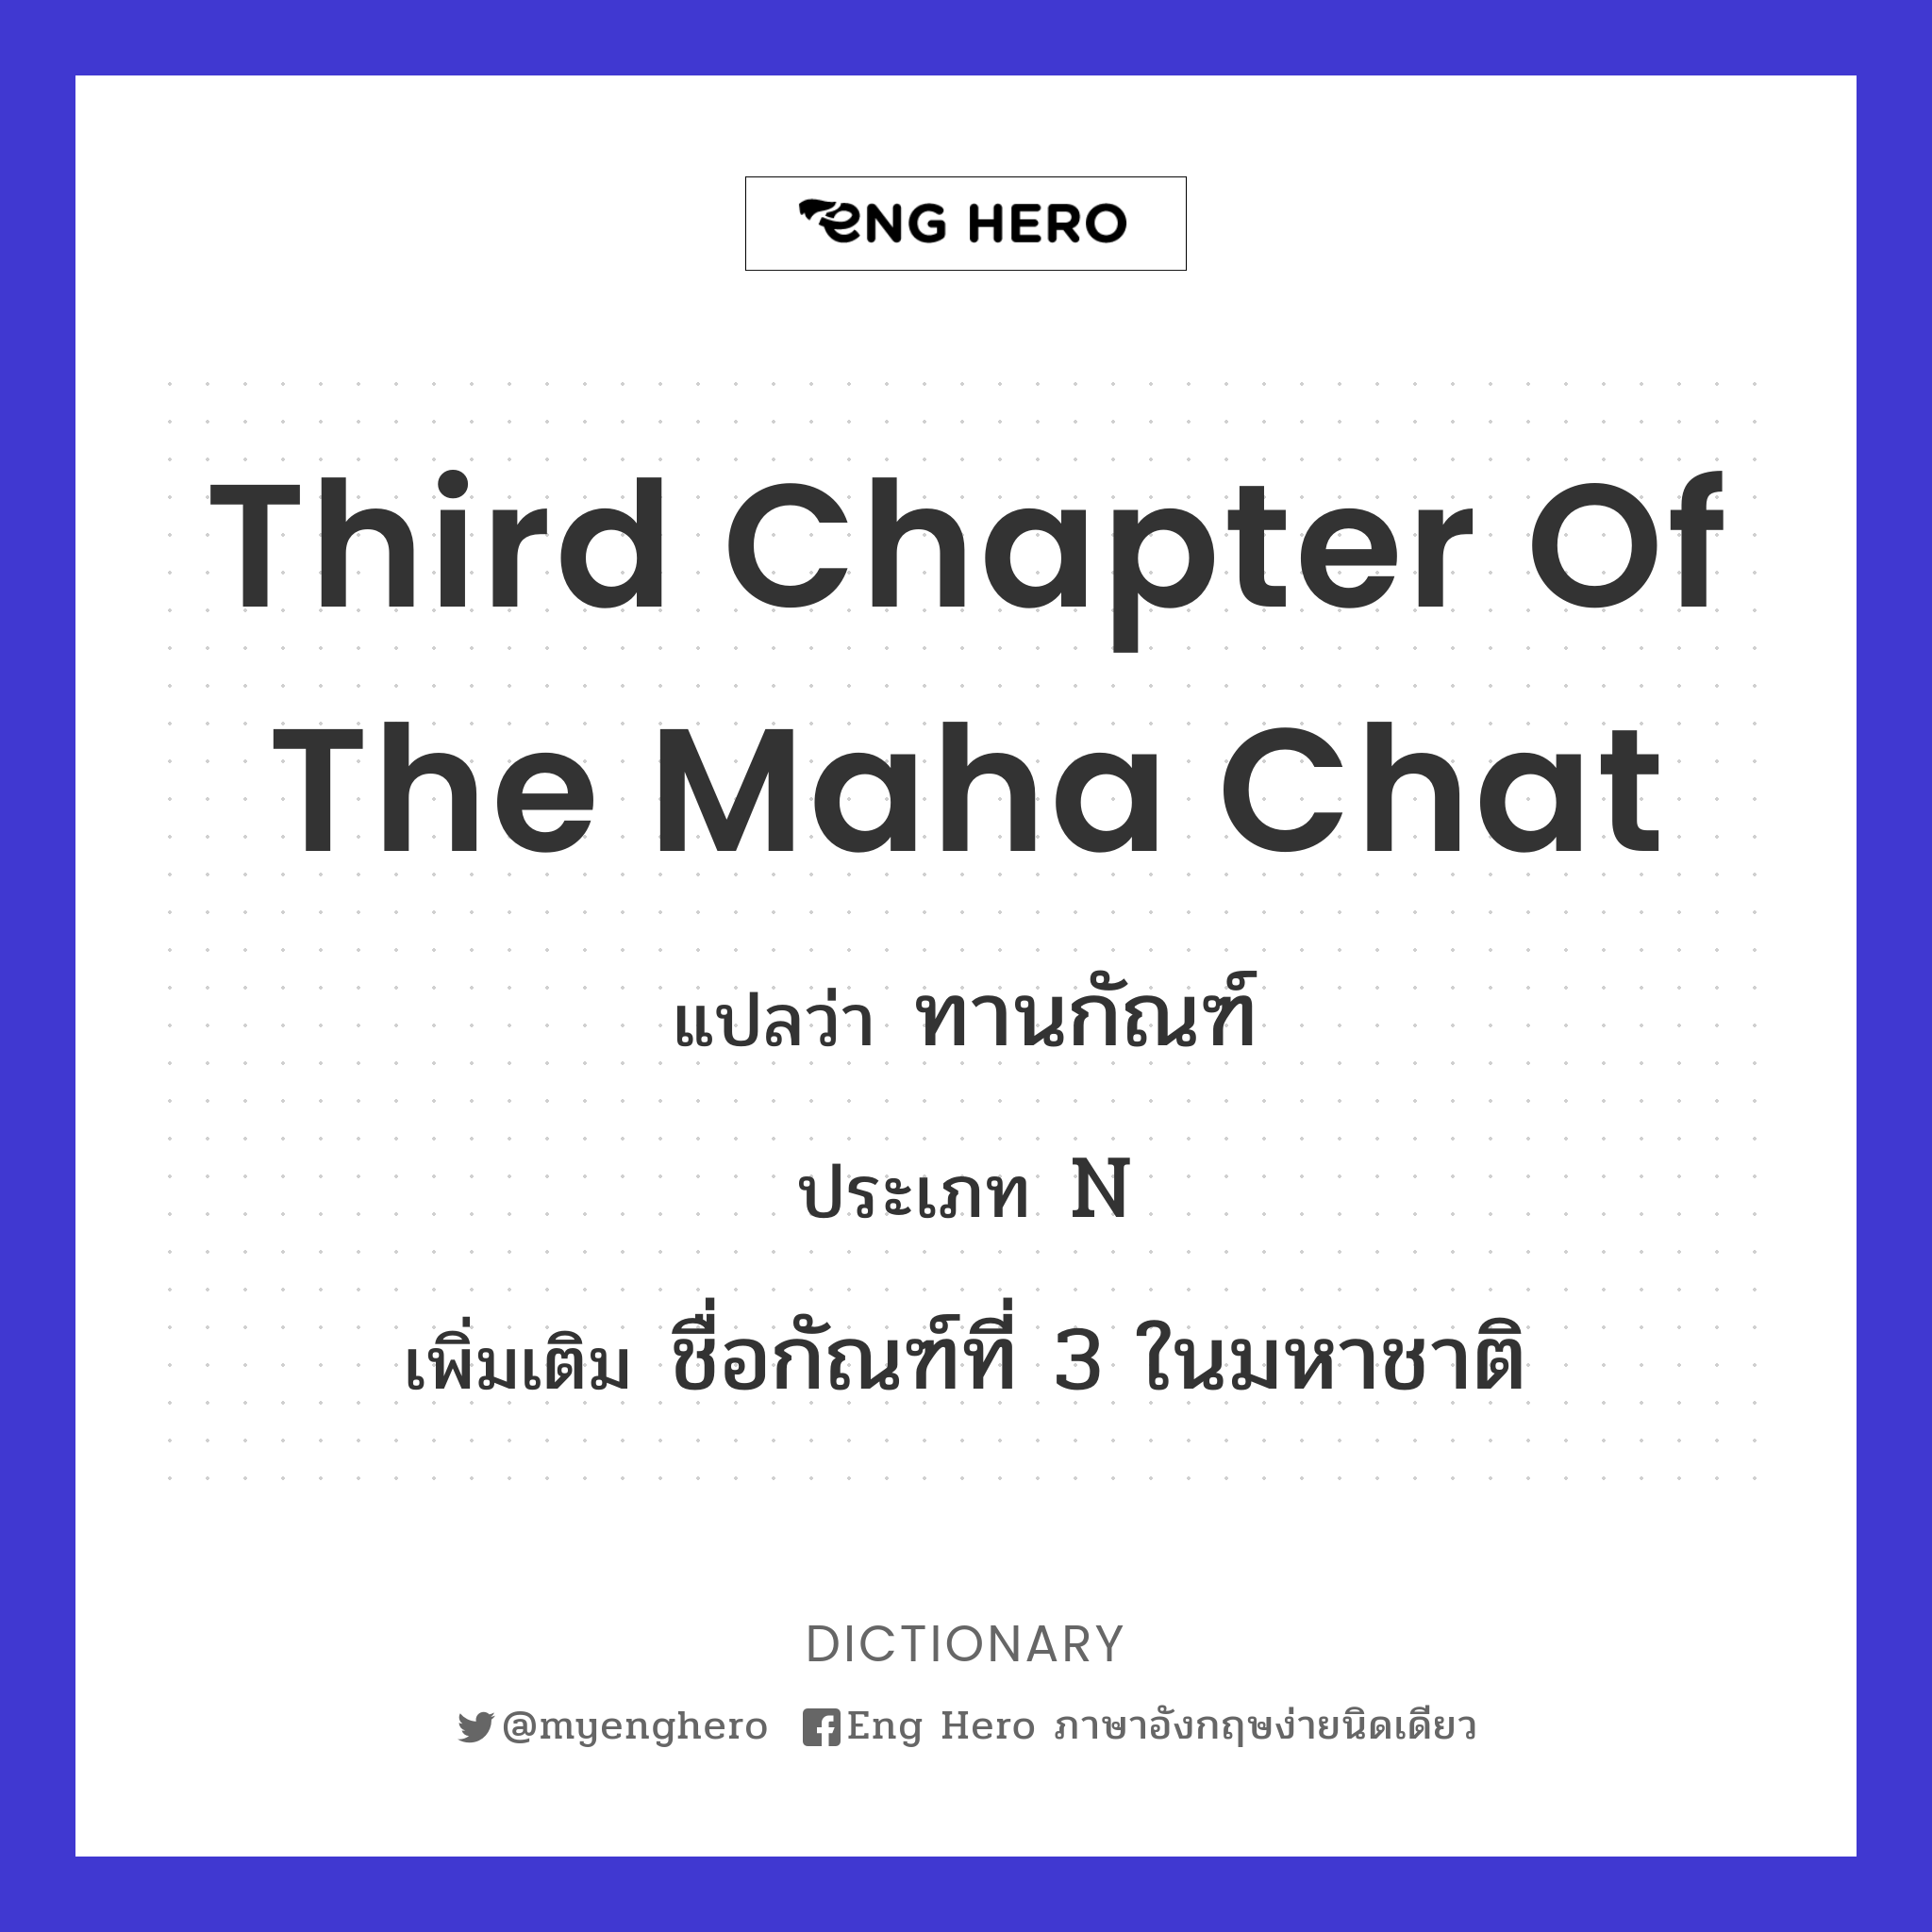 third chapter of the Maha chat